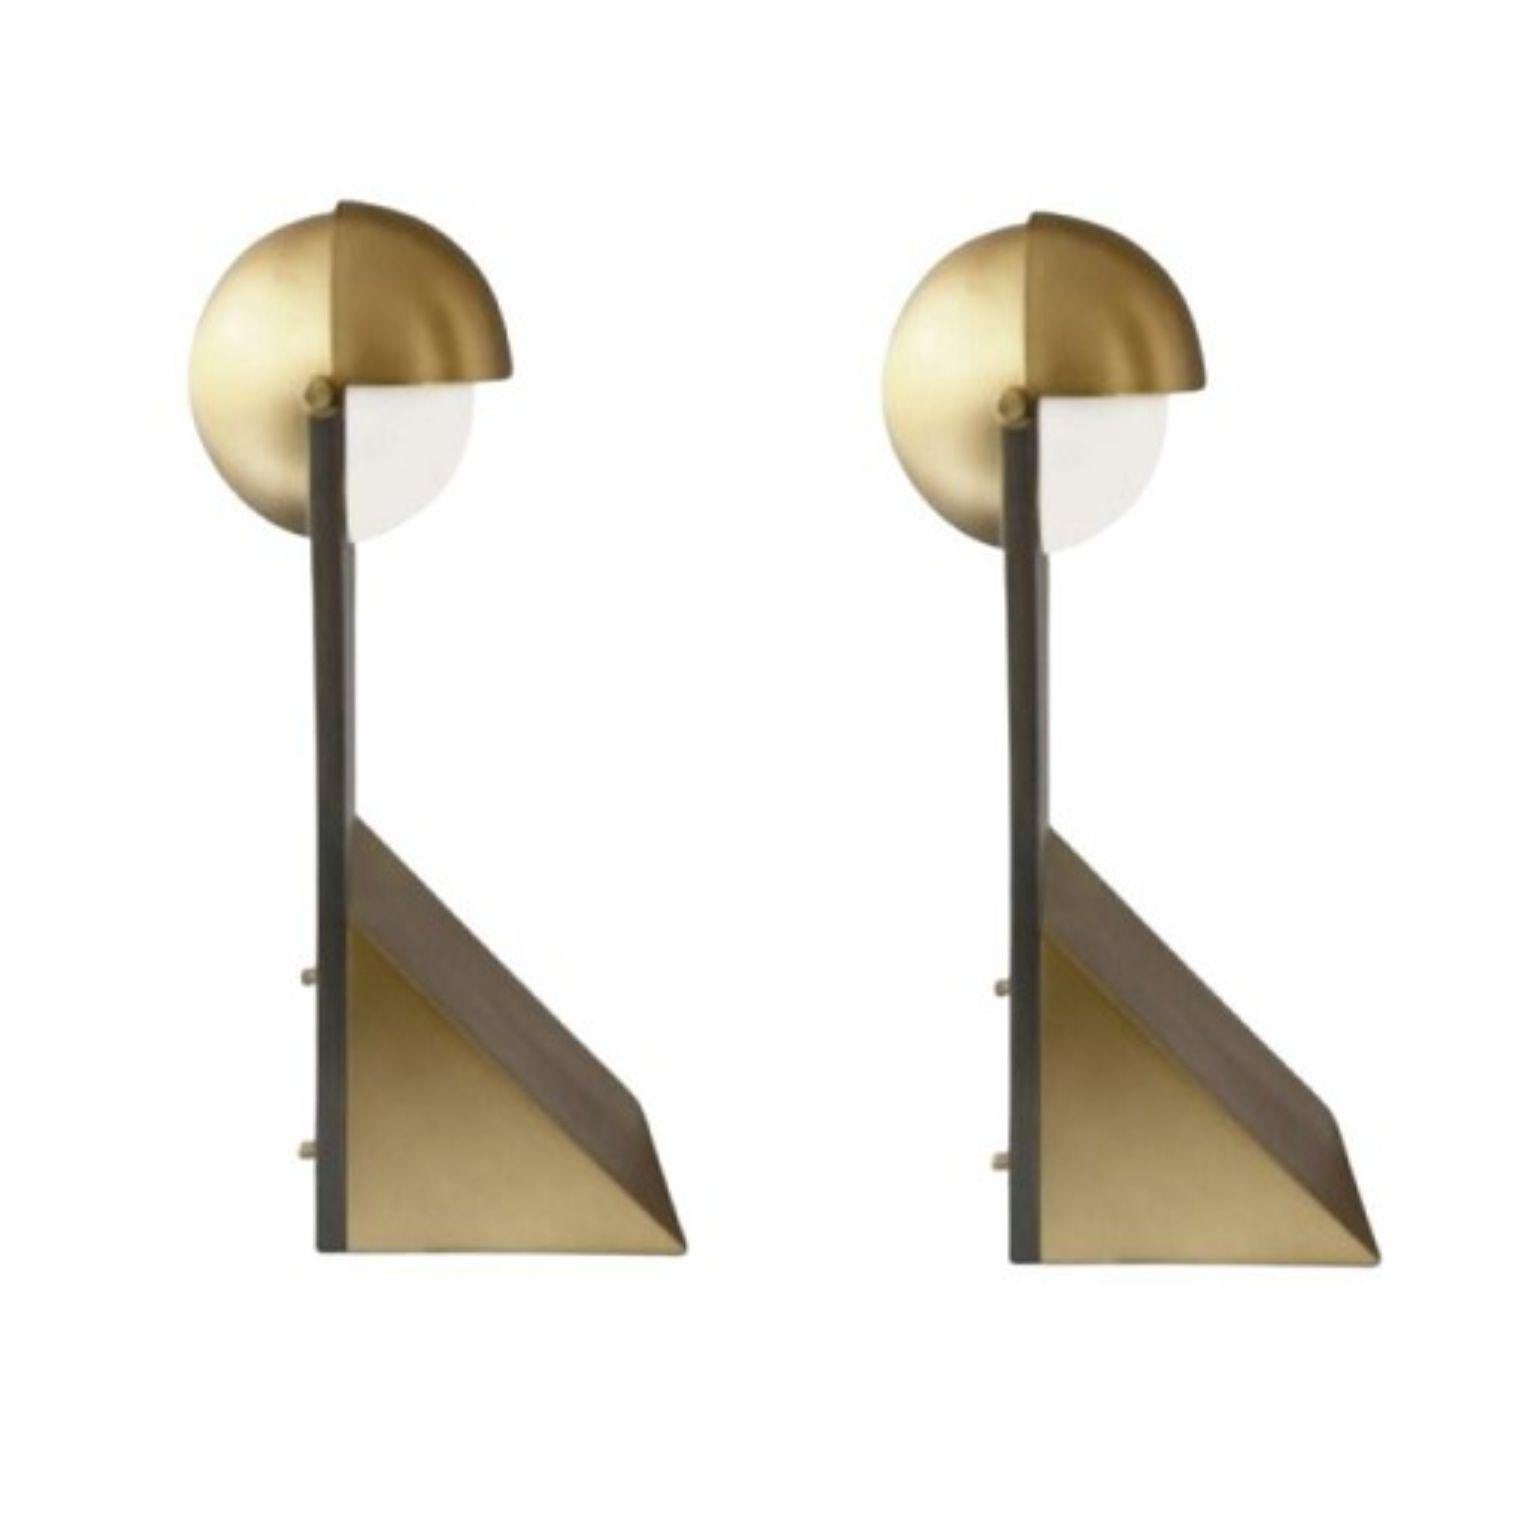 Set of 2 brass dance of geometry table lamps by square in circle
Dimensions: H48 x W14 x D18 cm
Materials: Brushed brass , Bbrushe grey Metal

Inspired by costumes from The Bauhaus Ballet, this triadic table lamp design utilizes the three